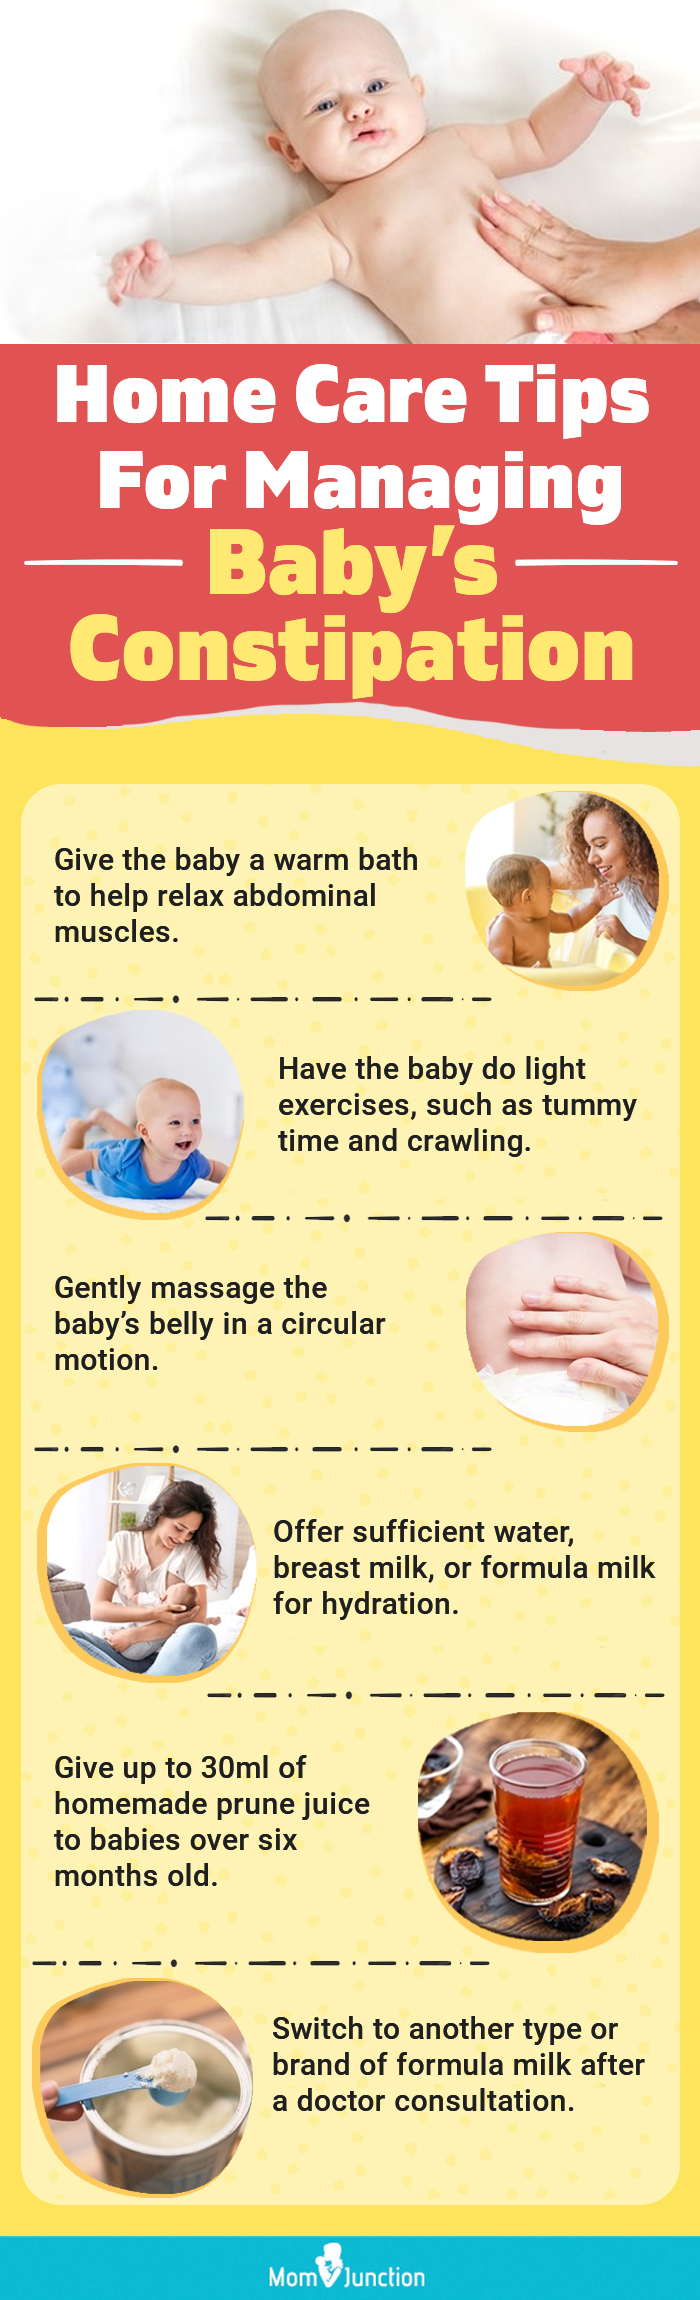 home care tips for managing babys constipation (infographic)